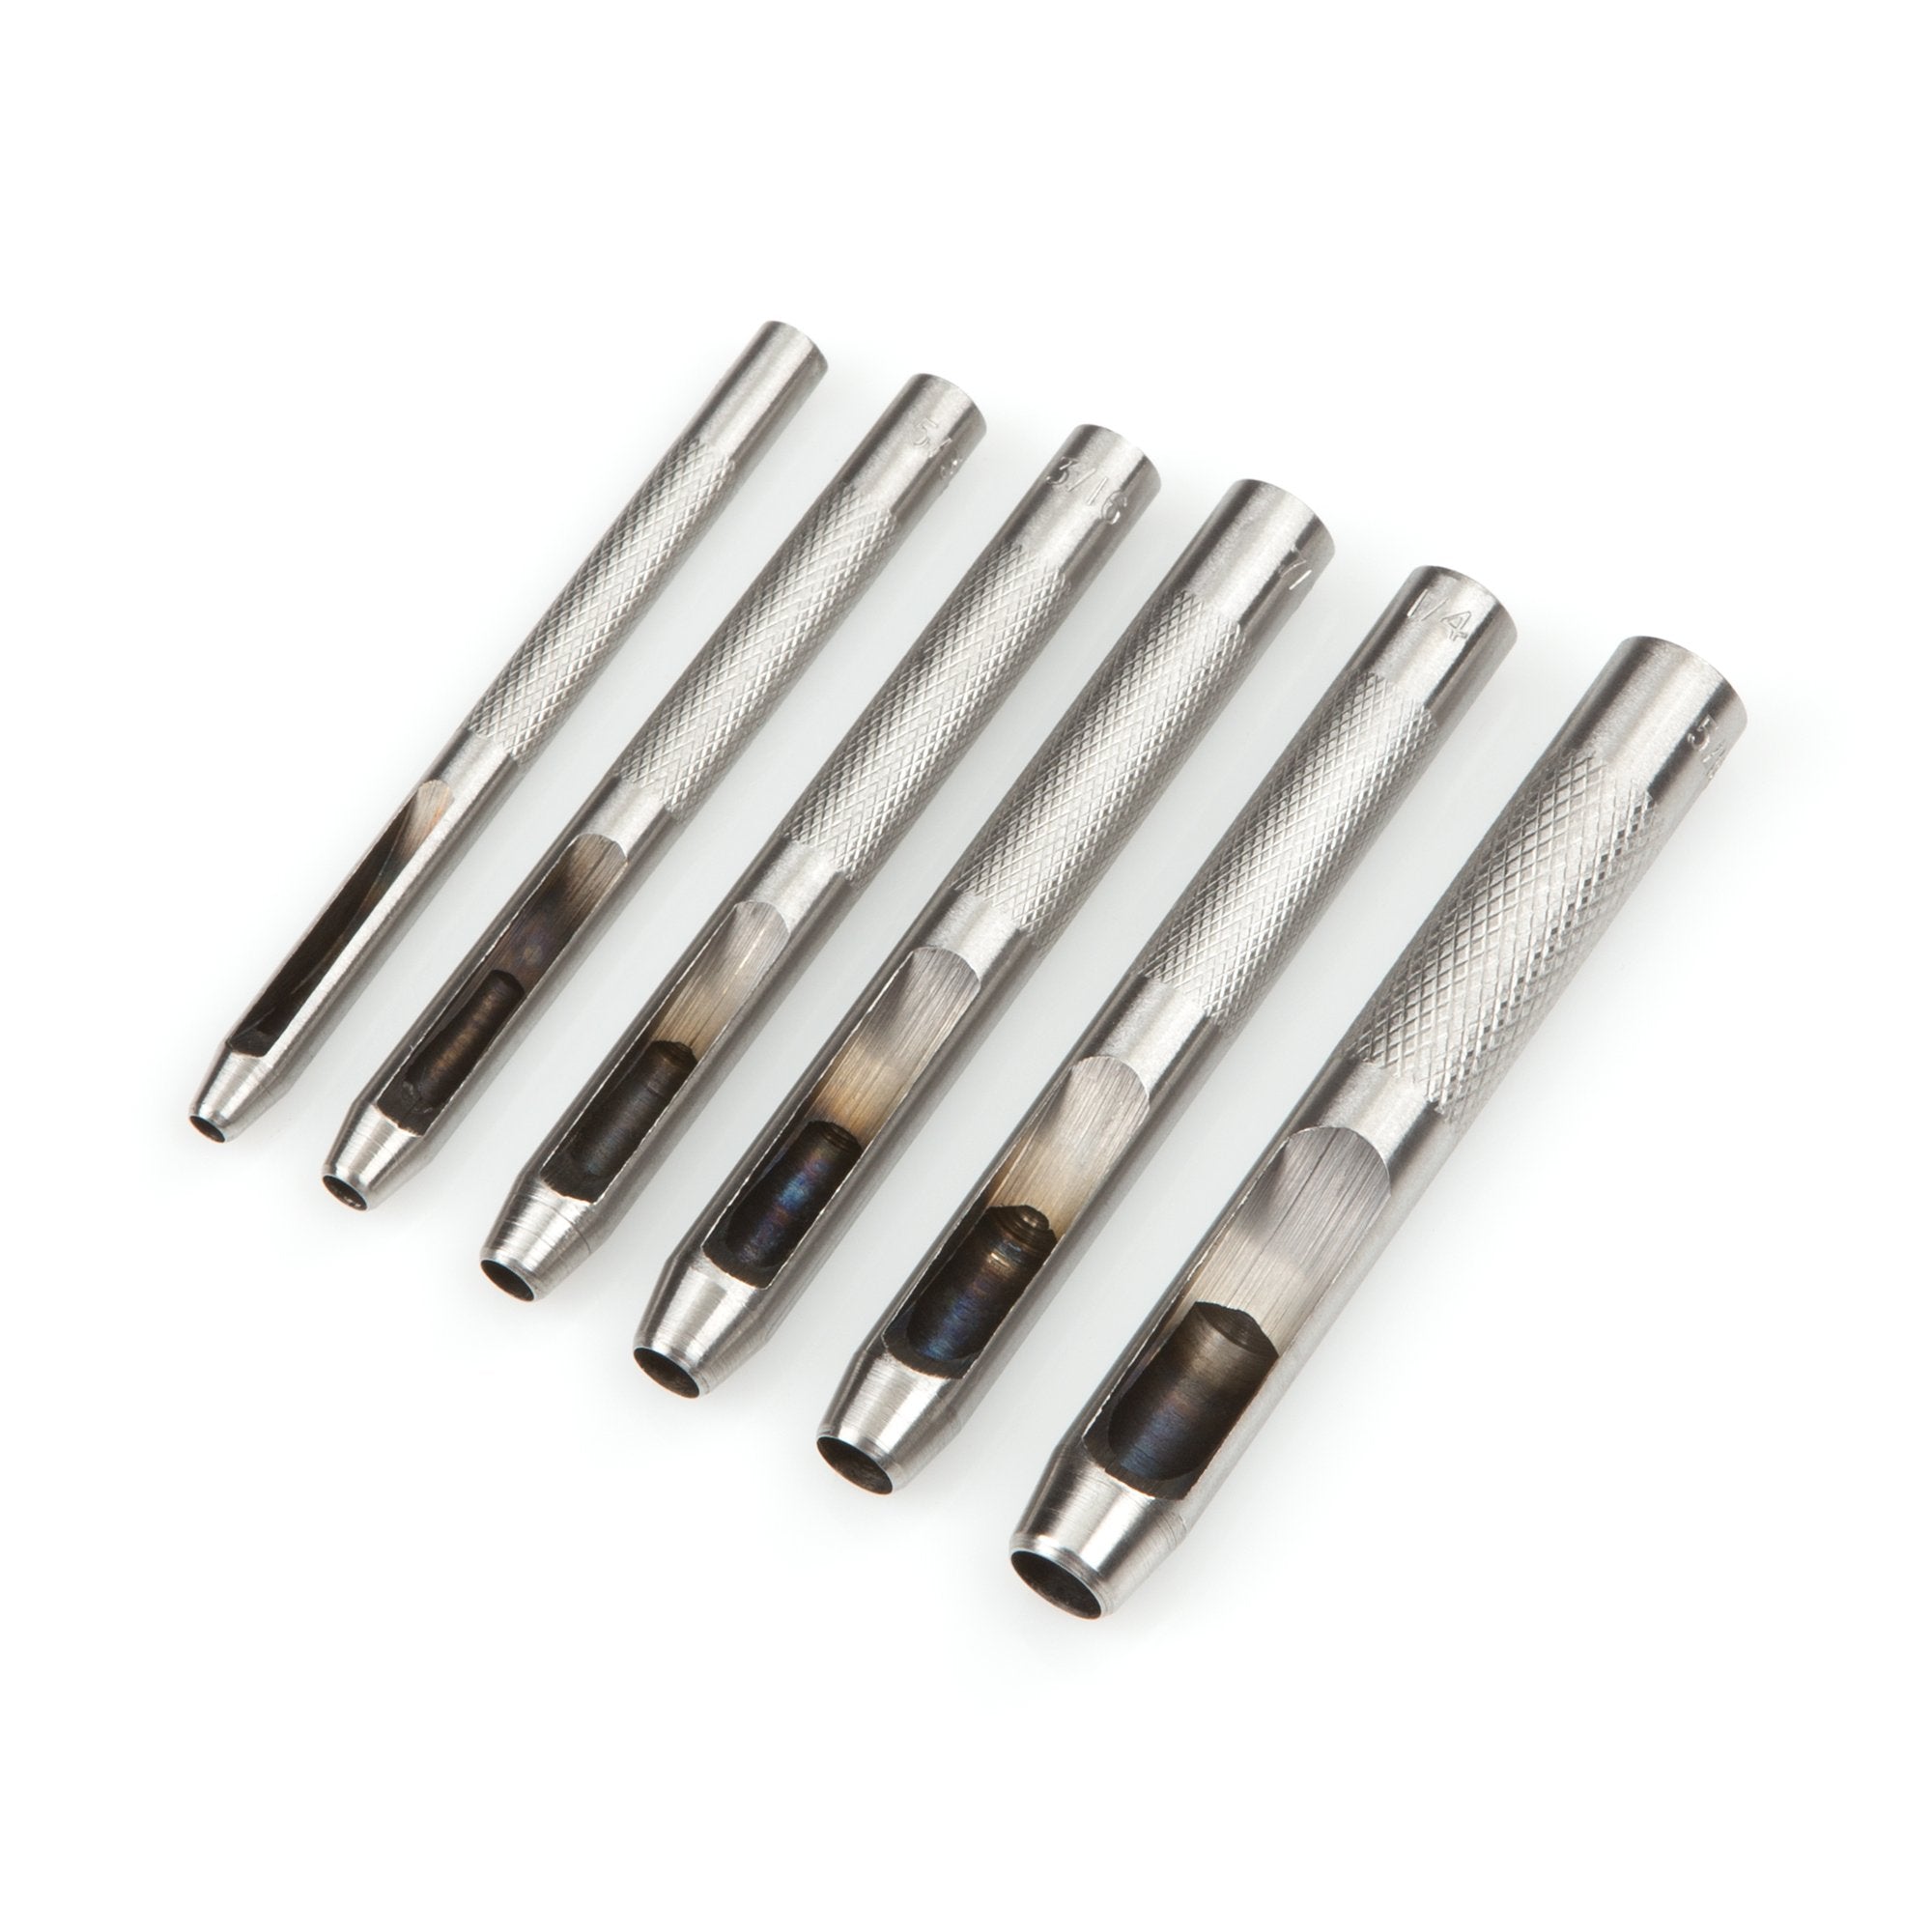 6 Piece Small Hollow Punches Leather 1/8 5/32 3/16 7/32 1/4 5/16